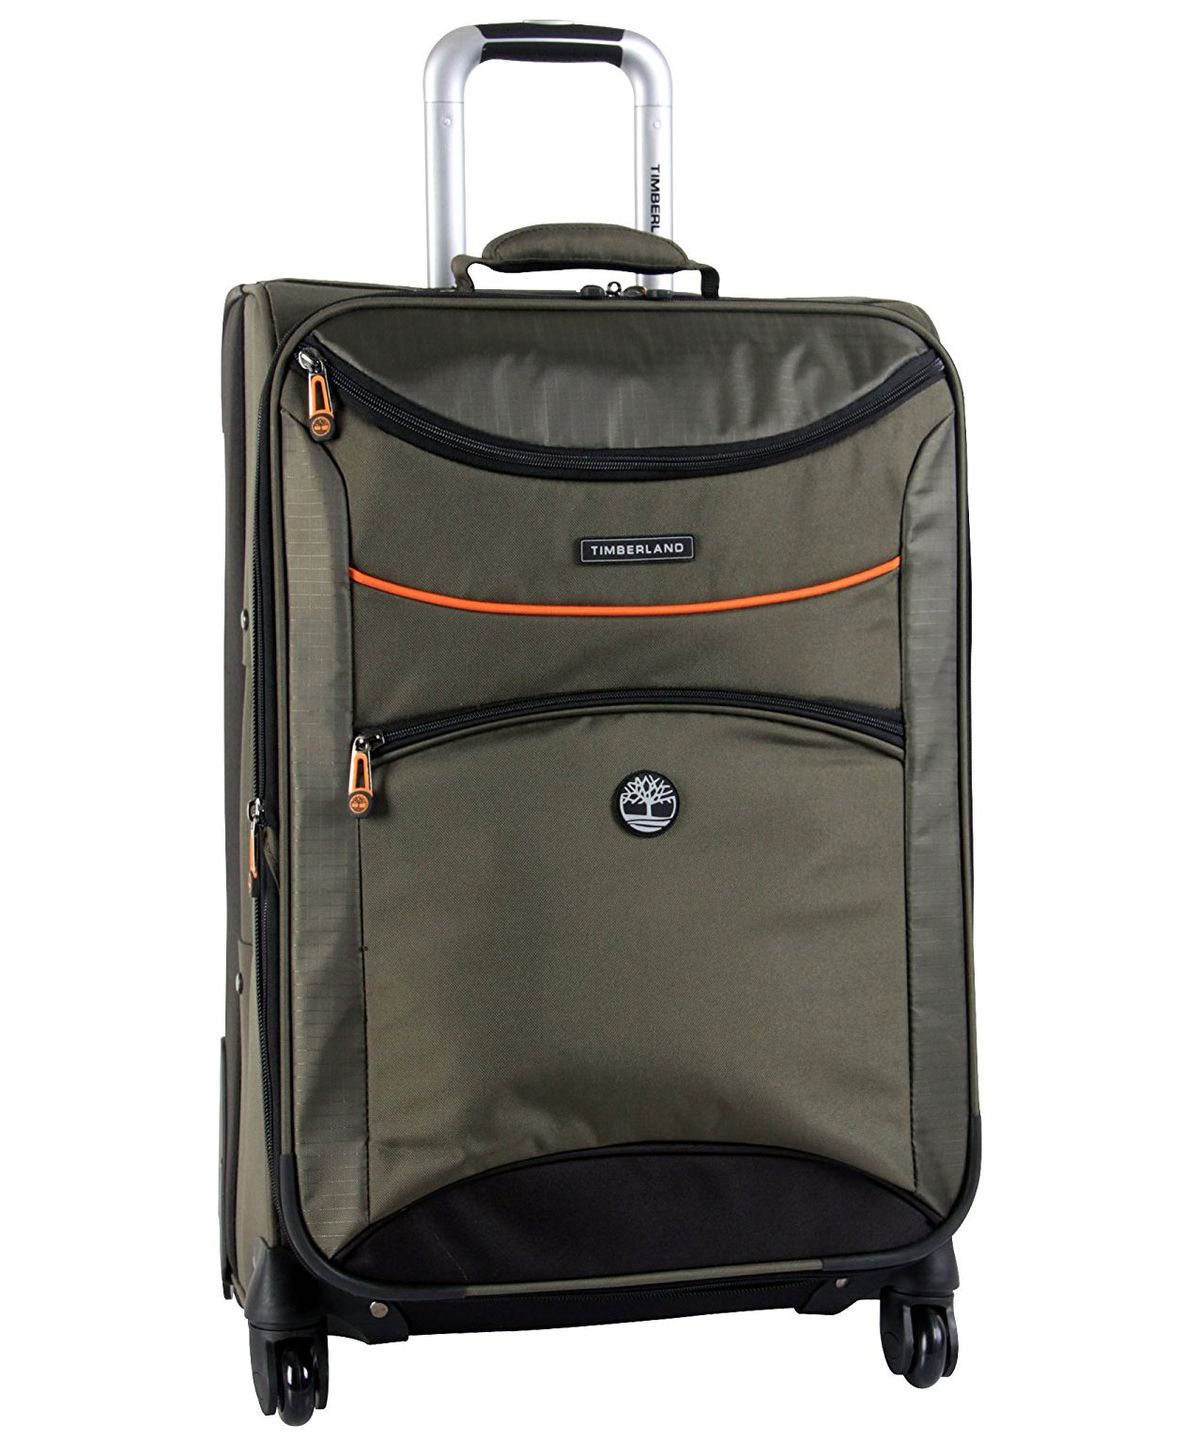 Timberland Luggage Route 4 24 Expandable Spinner